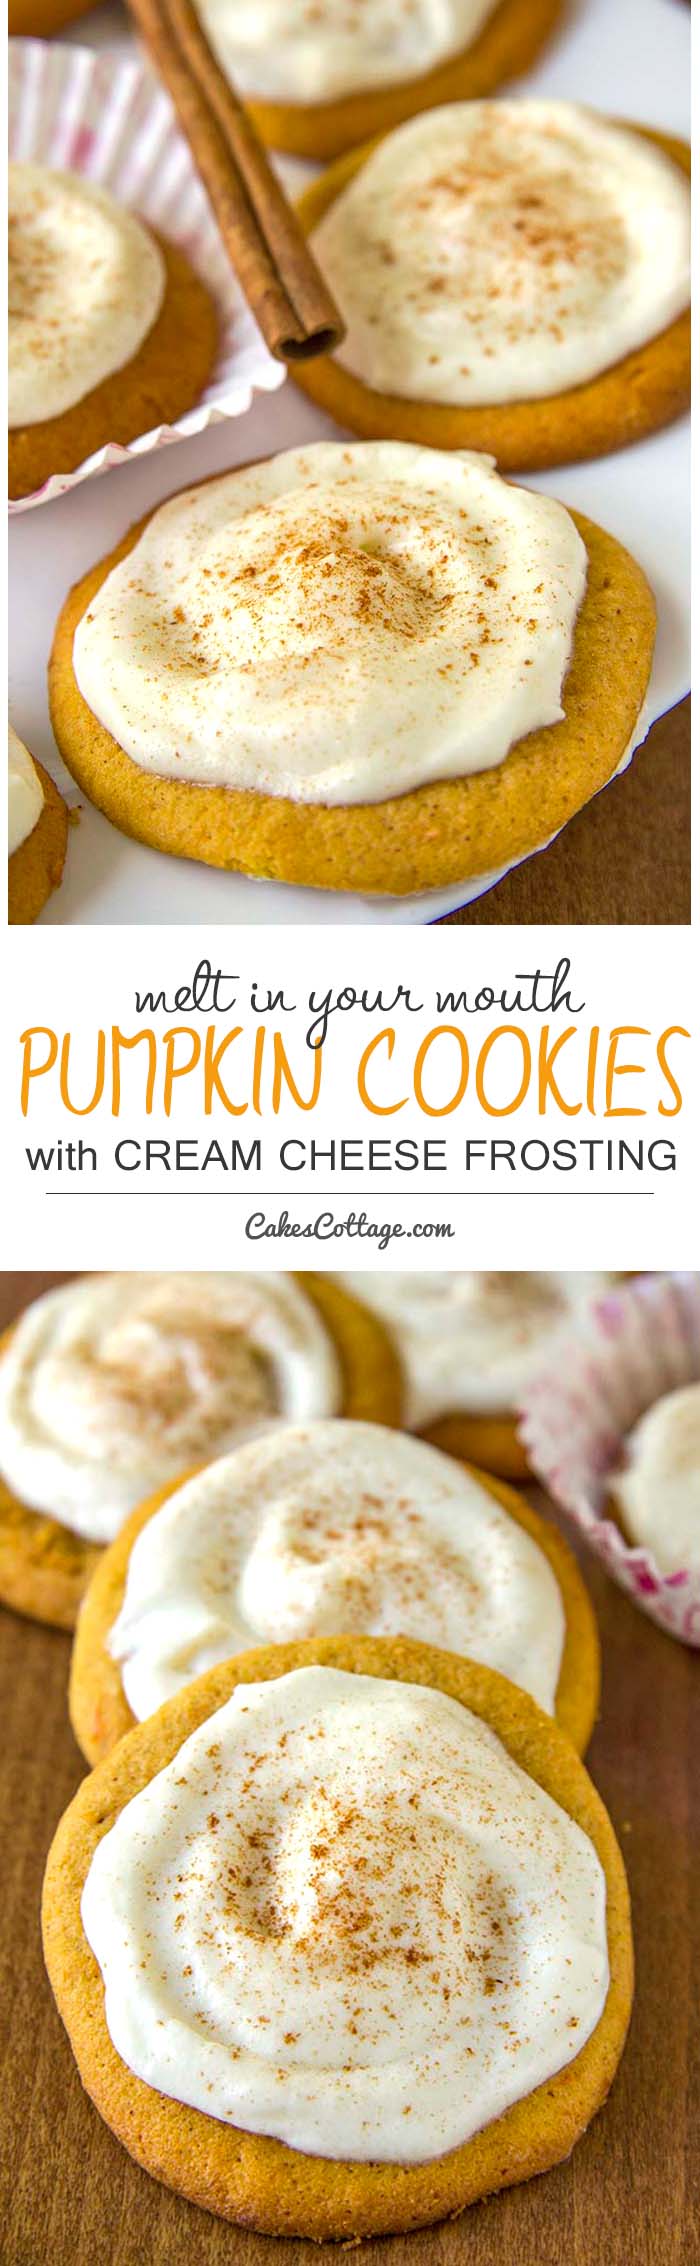 if you’re looking for pumpkin recipes, these melt-in-your-mouth pumpkin cookies are a MUST try this fall.